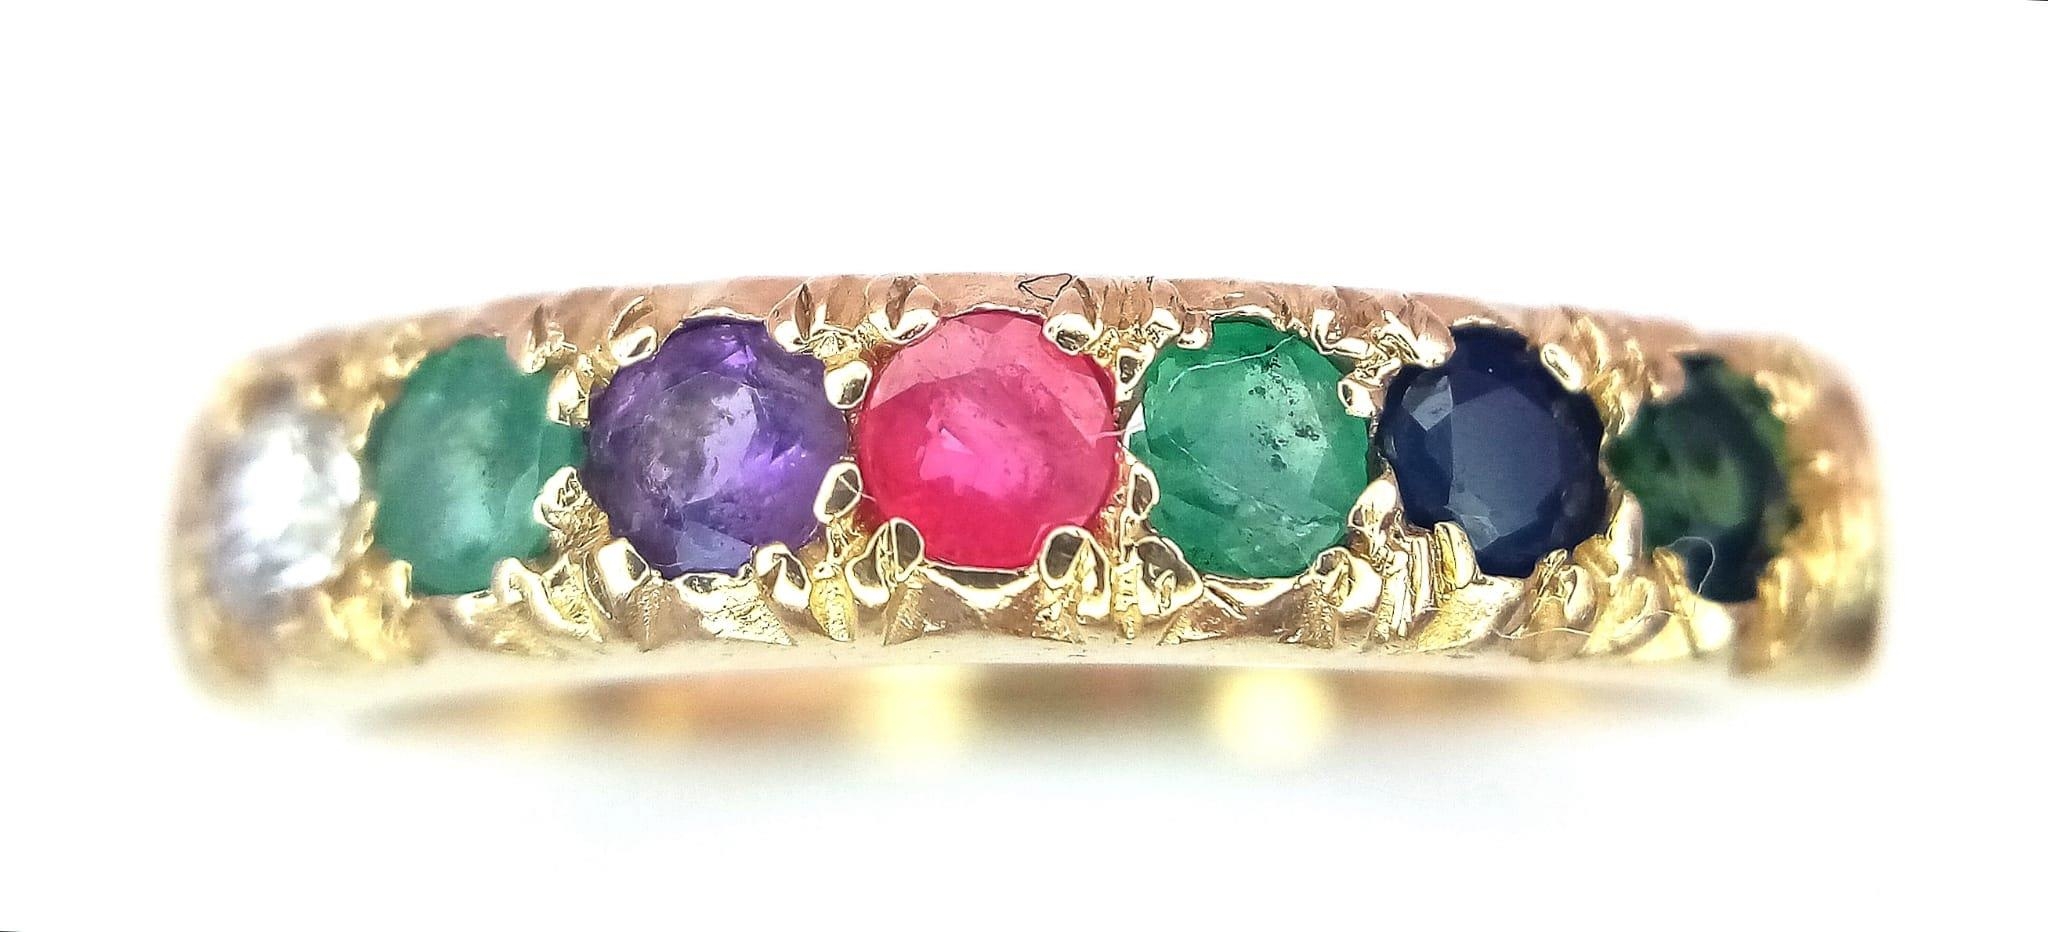 A PRETTY 9K YELLOW GOLD MULTI GEMSTONES SET DEAREST RING, WEIGHT 2.9G SIZE S - Image 4 of 11